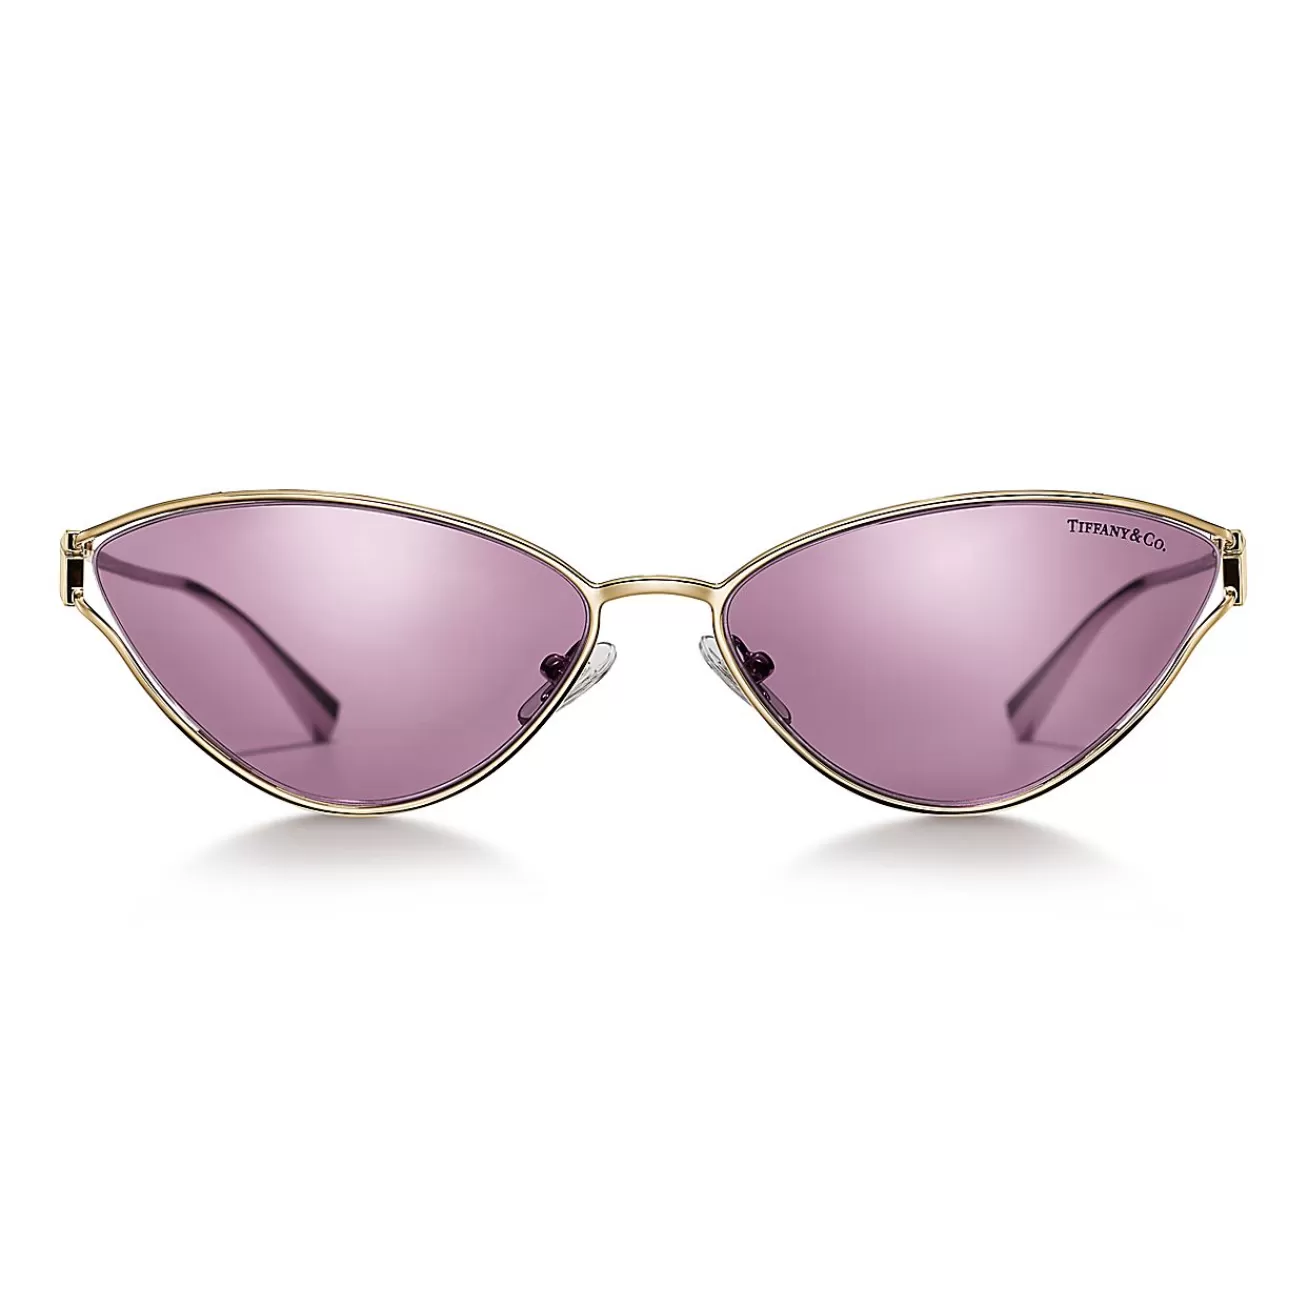 Tiffany & Co. Tiffany T Sunglasses in Pale Gold-colored Metal with Violet Mirrored Lenses | ^Women Tiffany T | Sunglasses